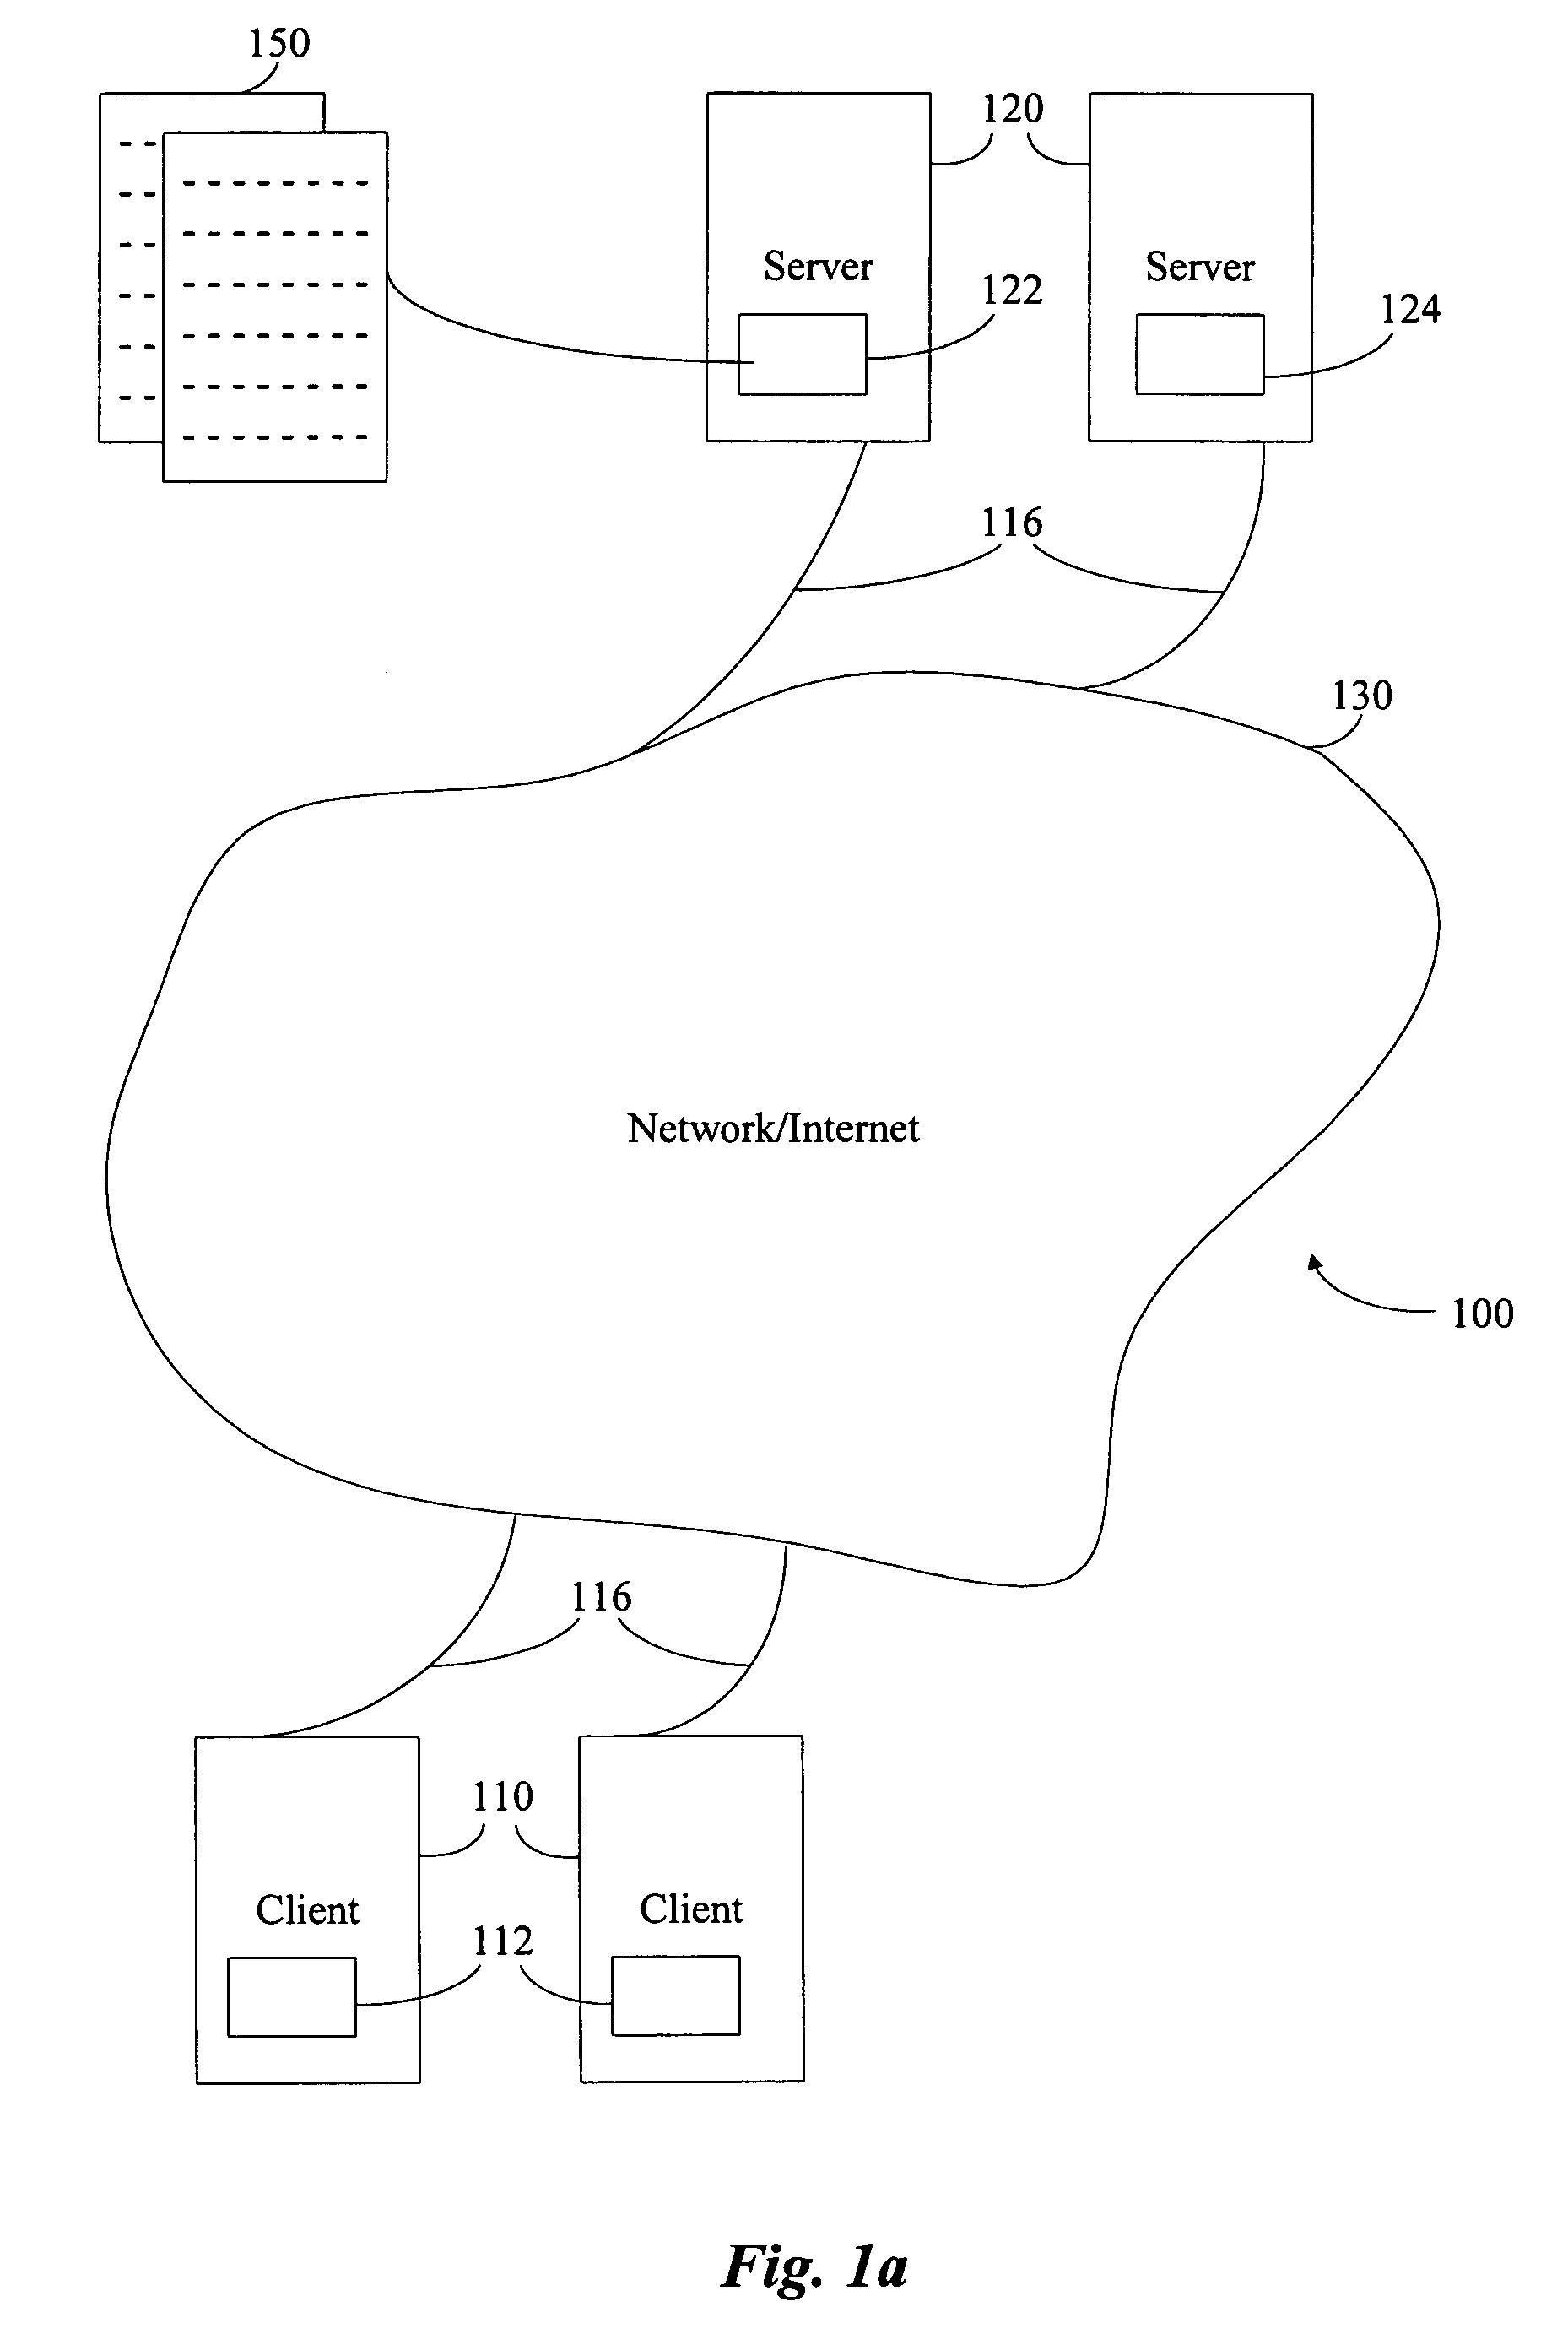 Content notification method, product, and apparatus